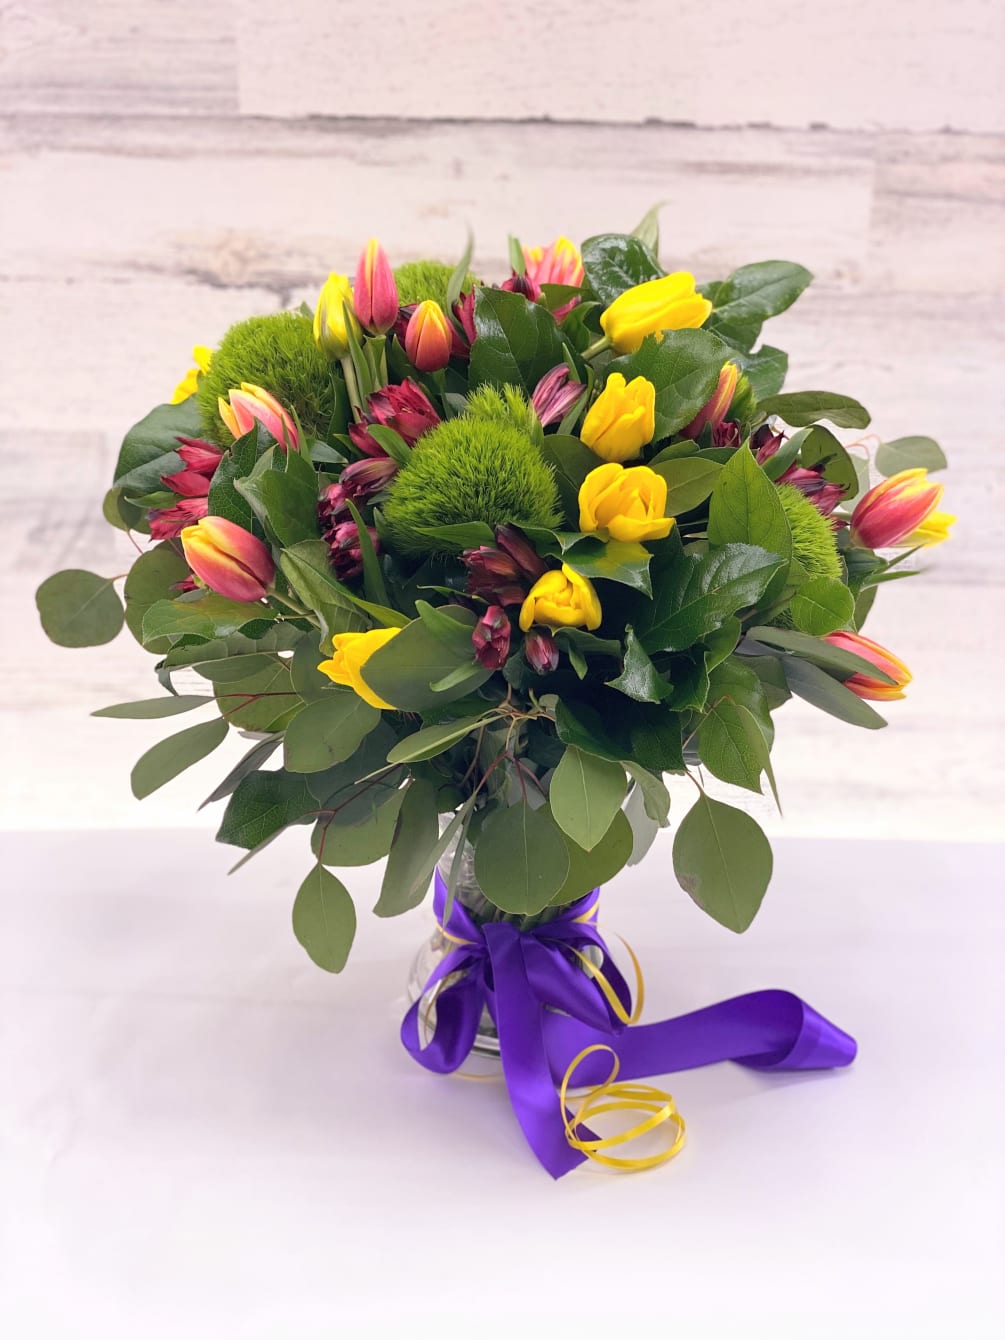 A composition of tulips of yellow and orange in a bouquet with